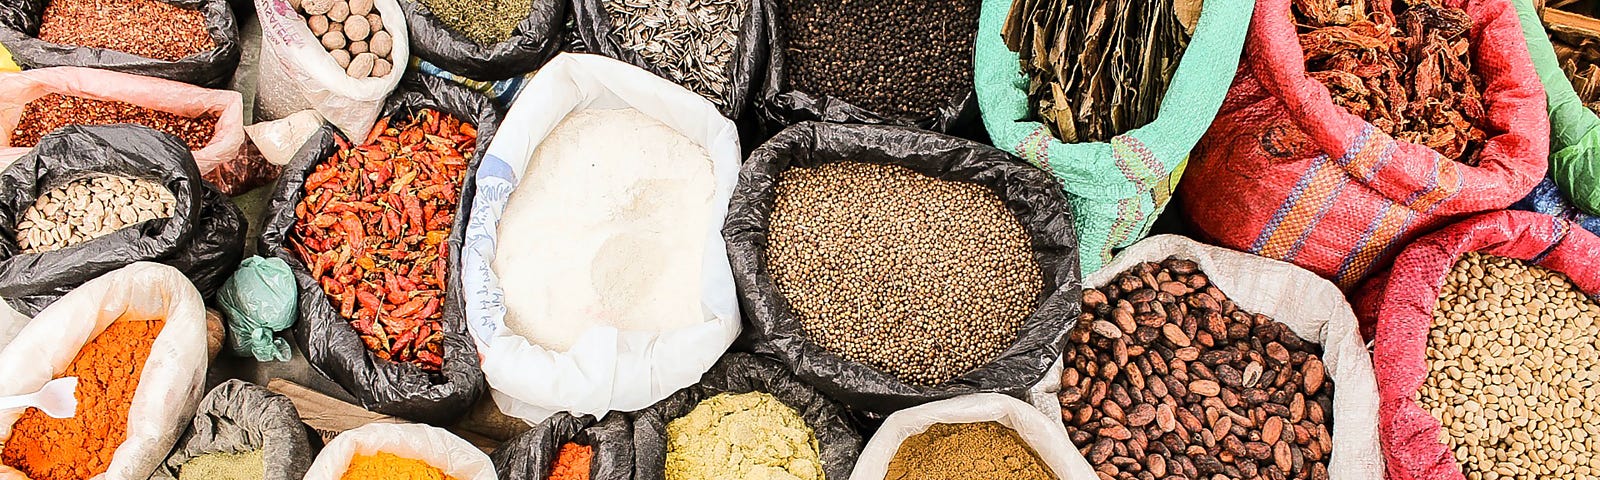 The picture shows an abundance of colorful spices and seeds in a variety of bags.